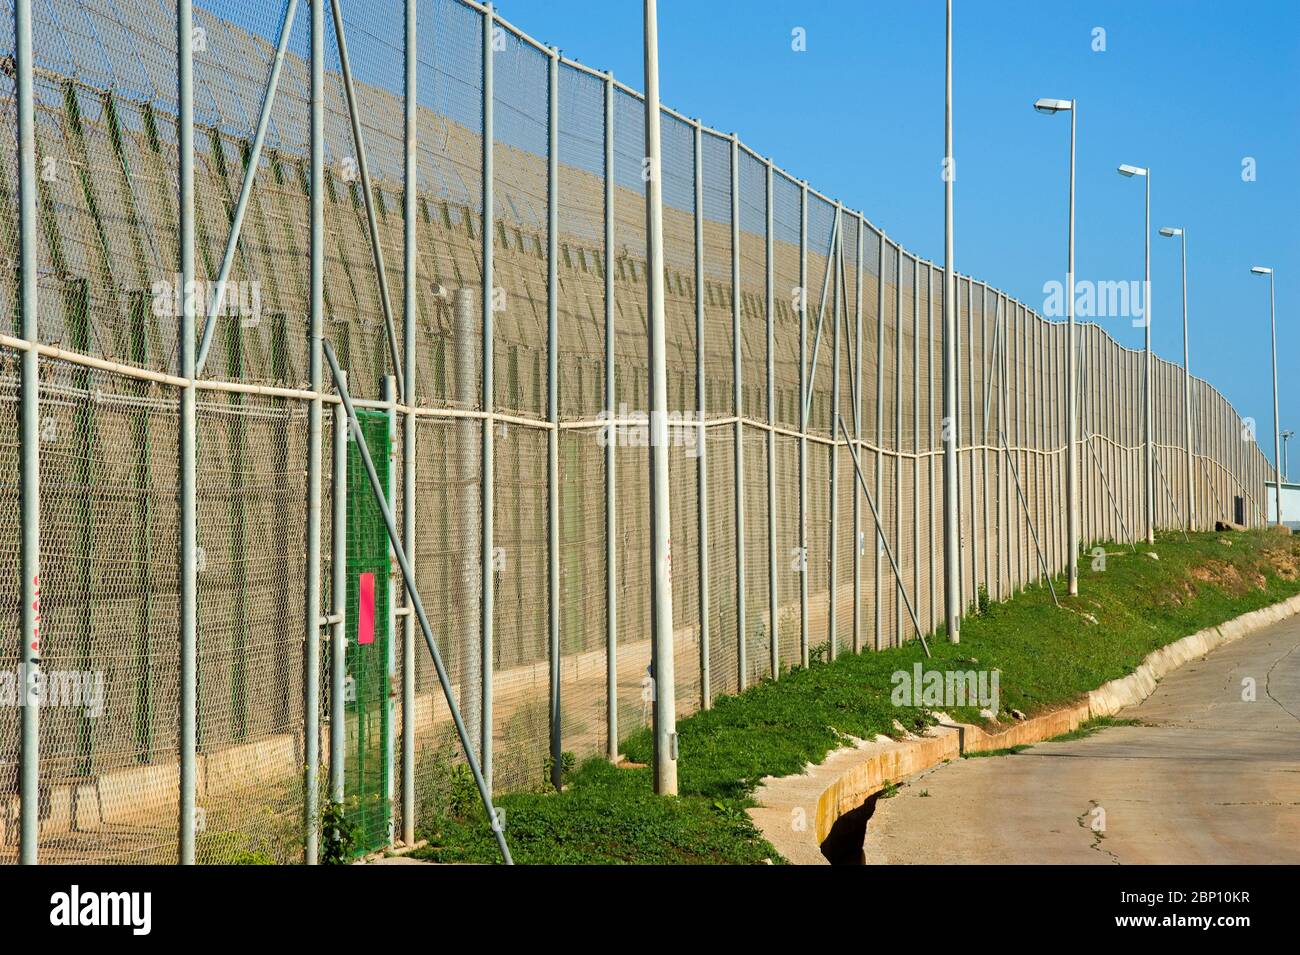 MELILLA,SPAIN-APRIL 19 : Perimeter fence that separates the Spanish enclave of Melilla and Morocco on April 19,2010 in Melilla, Spain. The fence which marks the border around the Spanish enclave in northern Morocco was build to discourage illegal immigrants from attempting to enter to Melilla.( Photo by Jordi Cami) Stock Photo